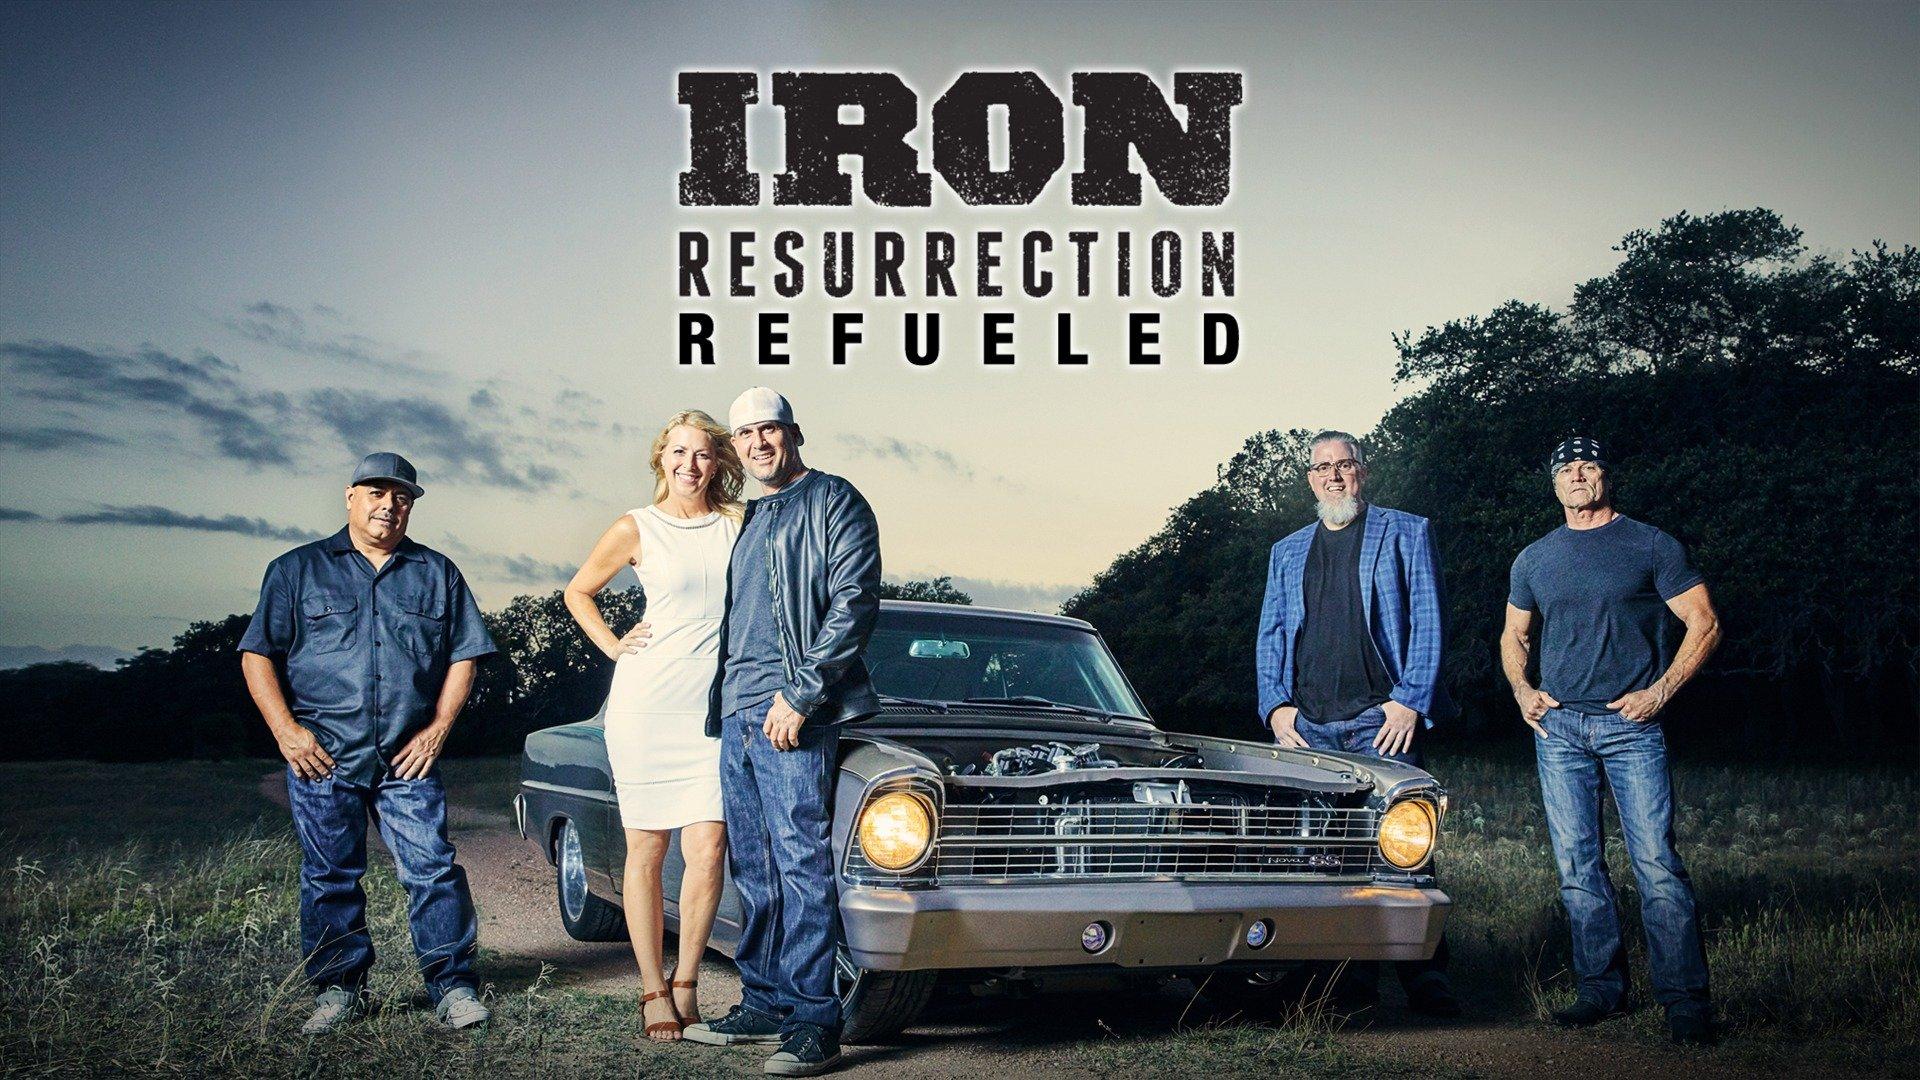 Watch Iron Resurrection Refueled Streaming Online on Philo (Free Trial)